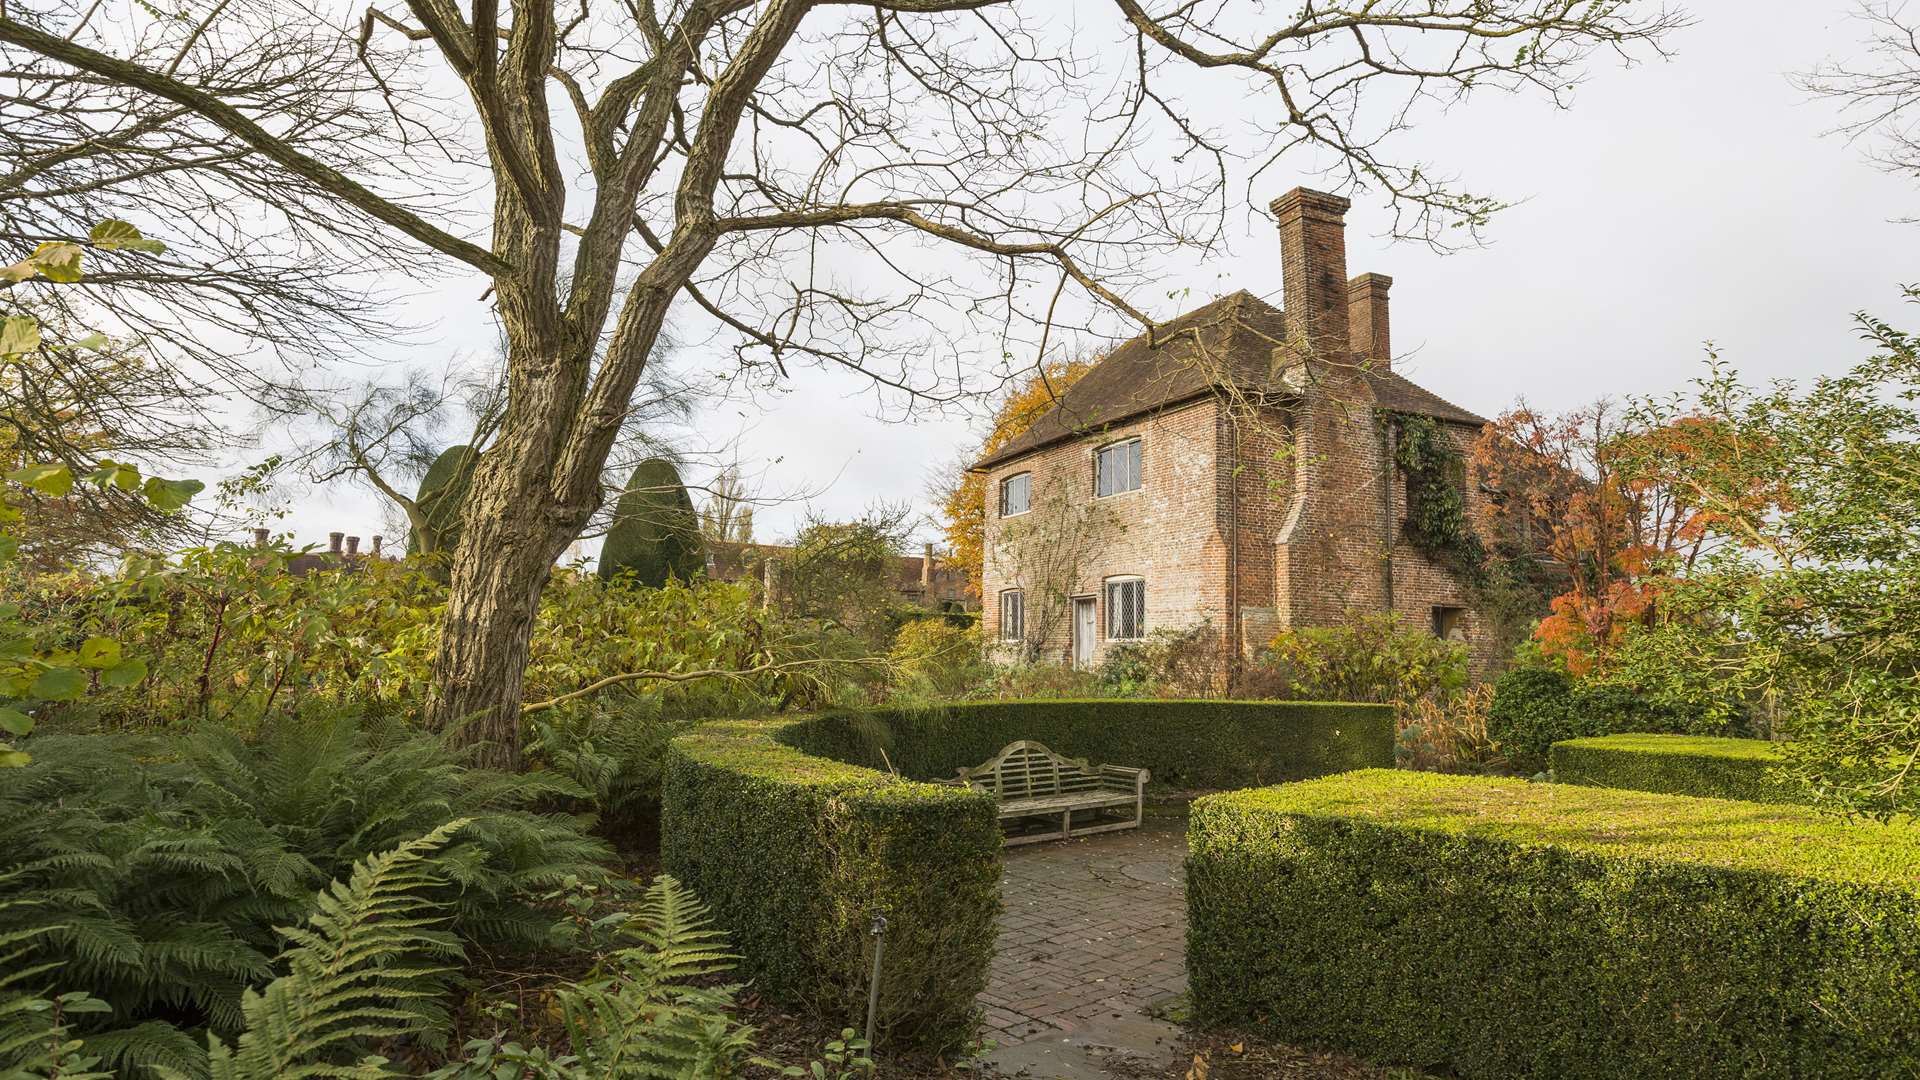 The newly-opened South Cottage at Sissinghurst Picture: National Trust/James Dobson